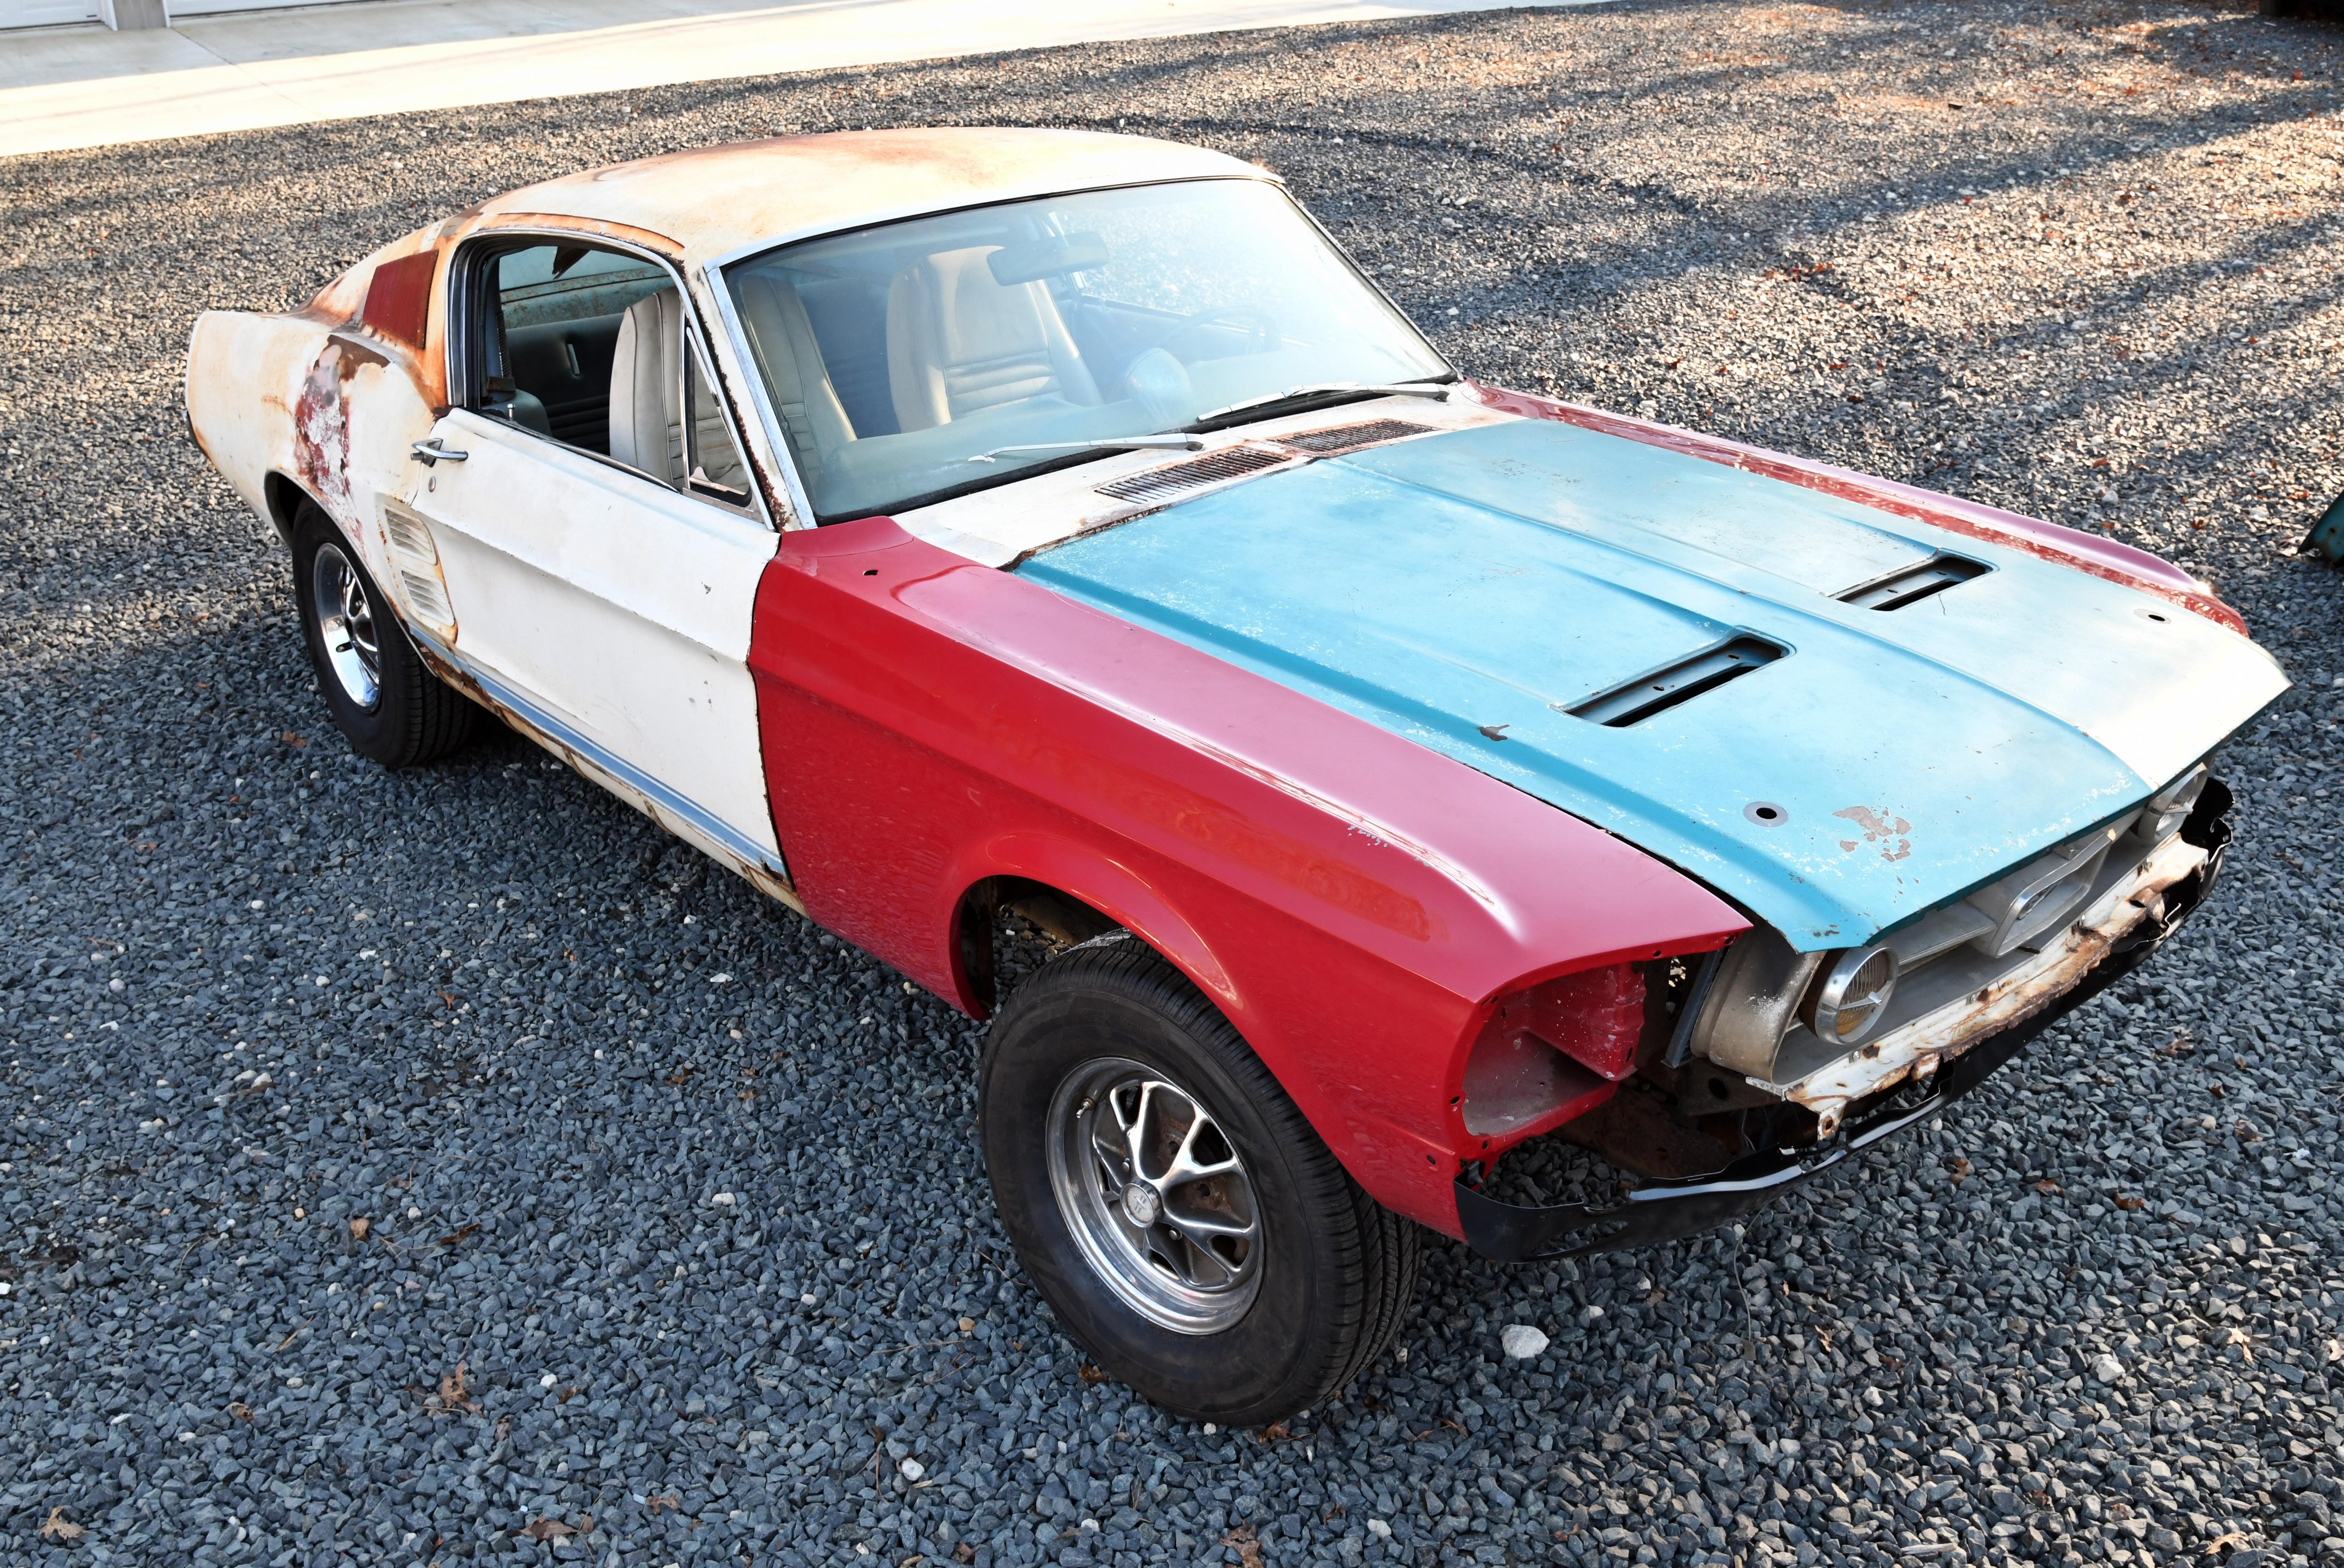 This 1967 Ford Mustang Pony Car was Rescued From the Pasture